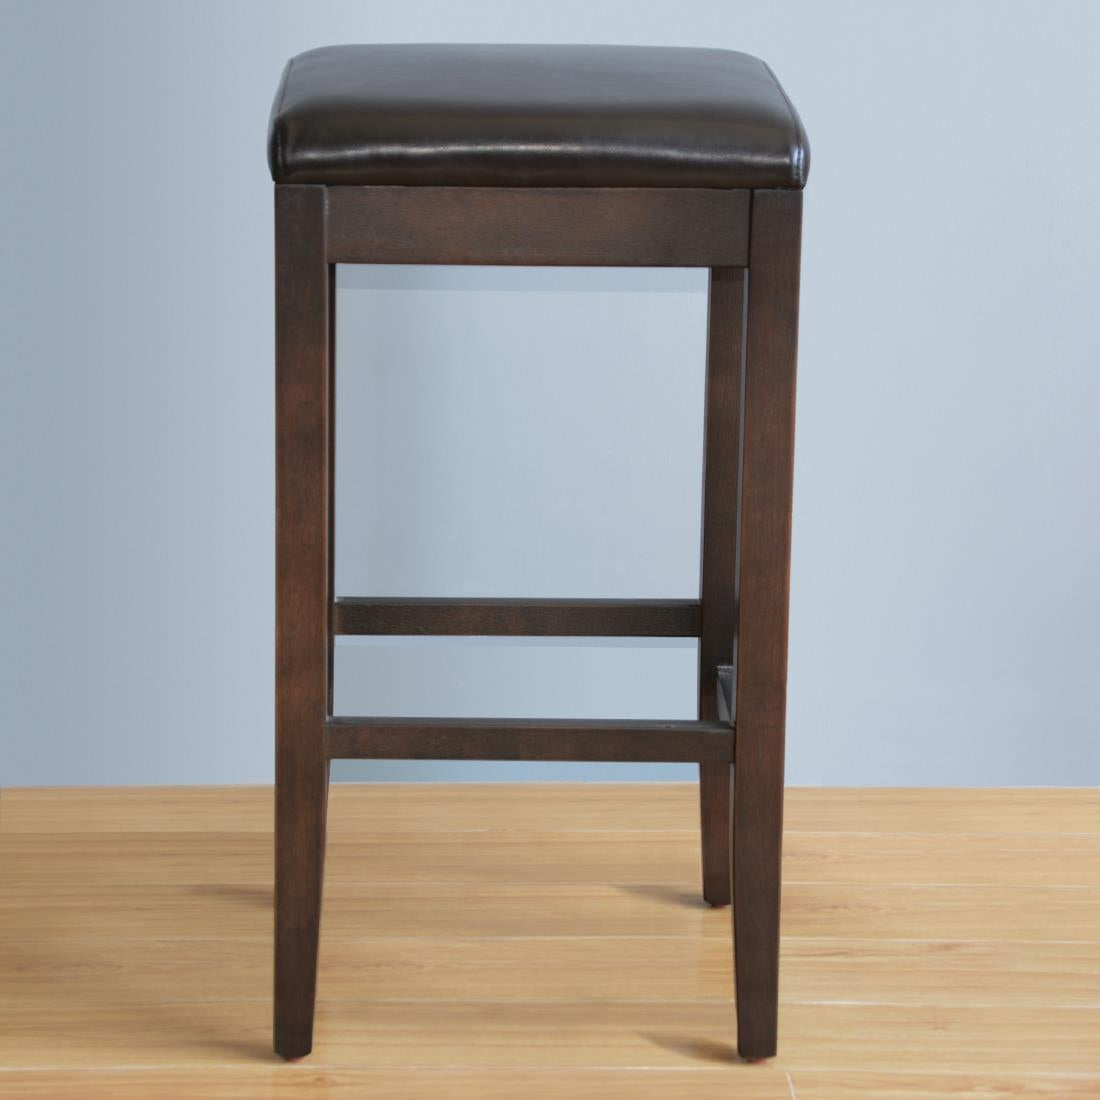 Bolero Faux Leather High Bar Stools (Pack of 2) JD Catering Equipment Solutions Ltd